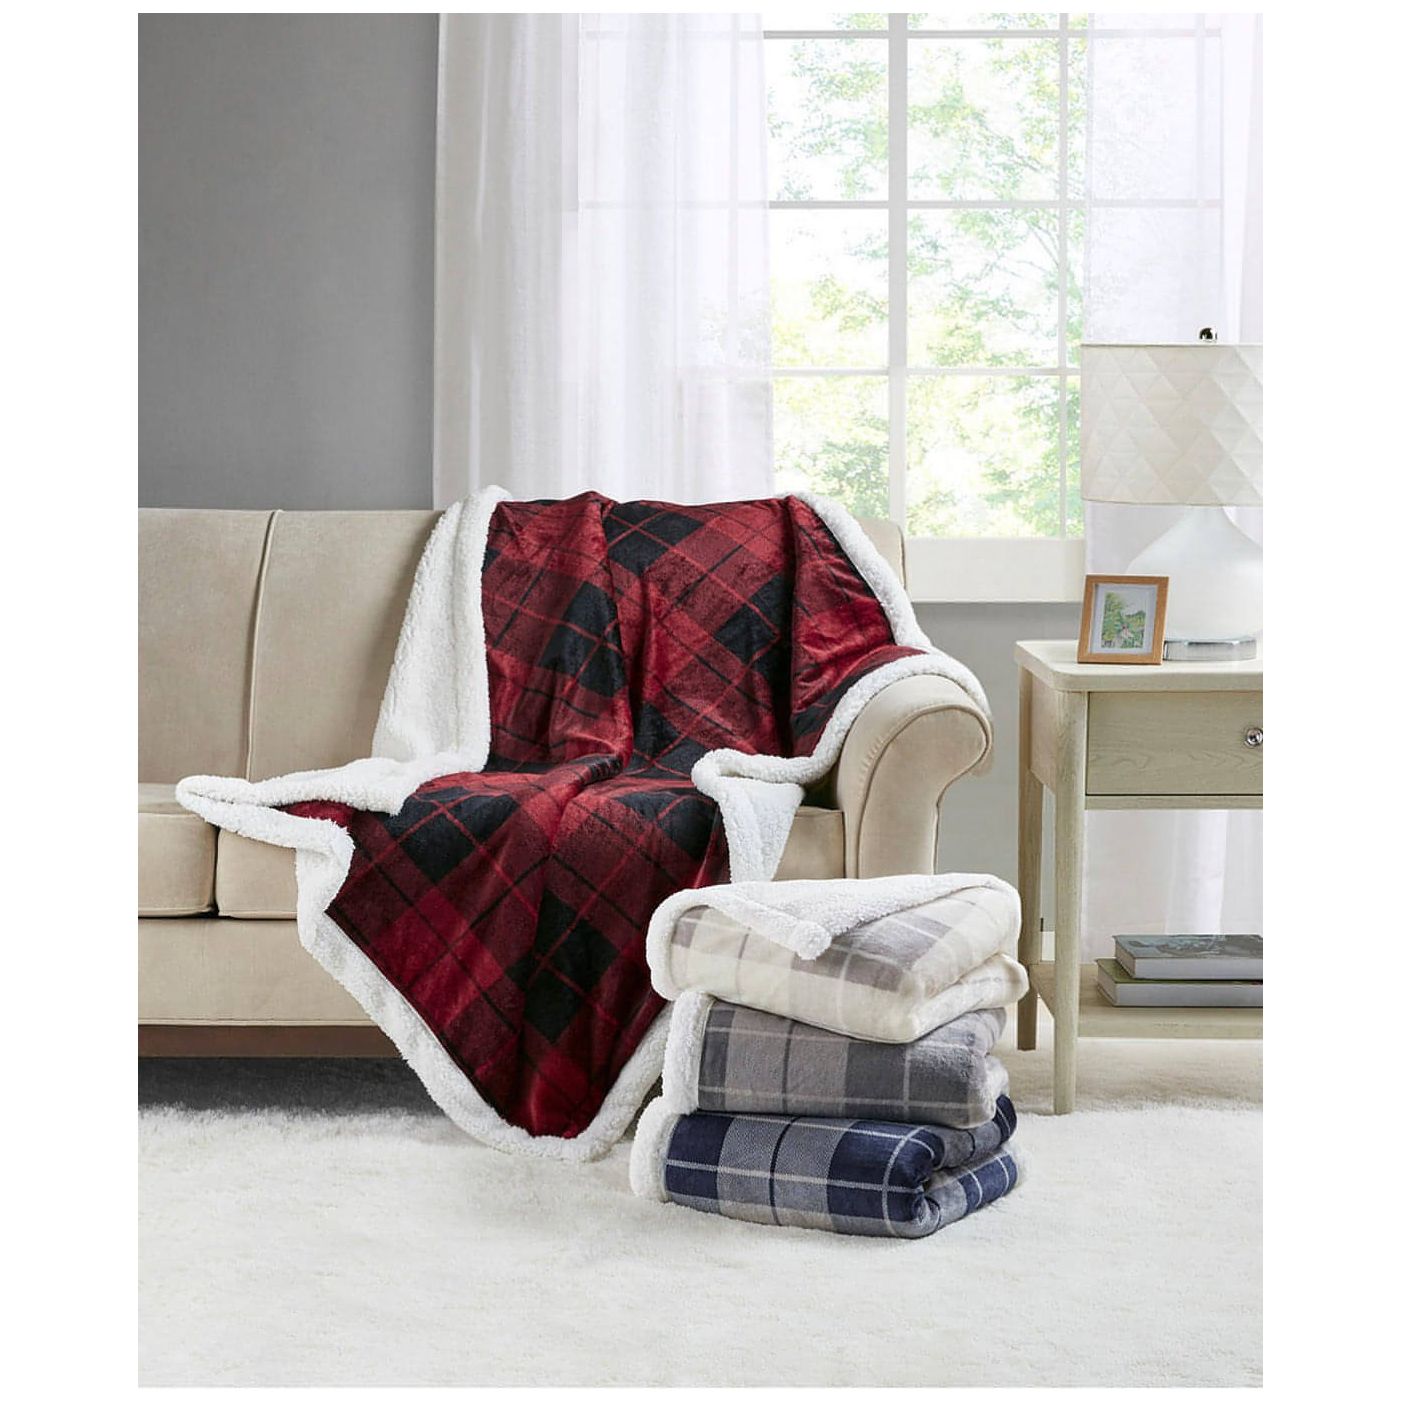 Martha Stewart Collection Plaid Reversible Classic Sherpa Throw, 50" x 60" (Red/Black) - Brandat OutletBuy Sherpa Throw Blanket | Martha Stewart Collection 